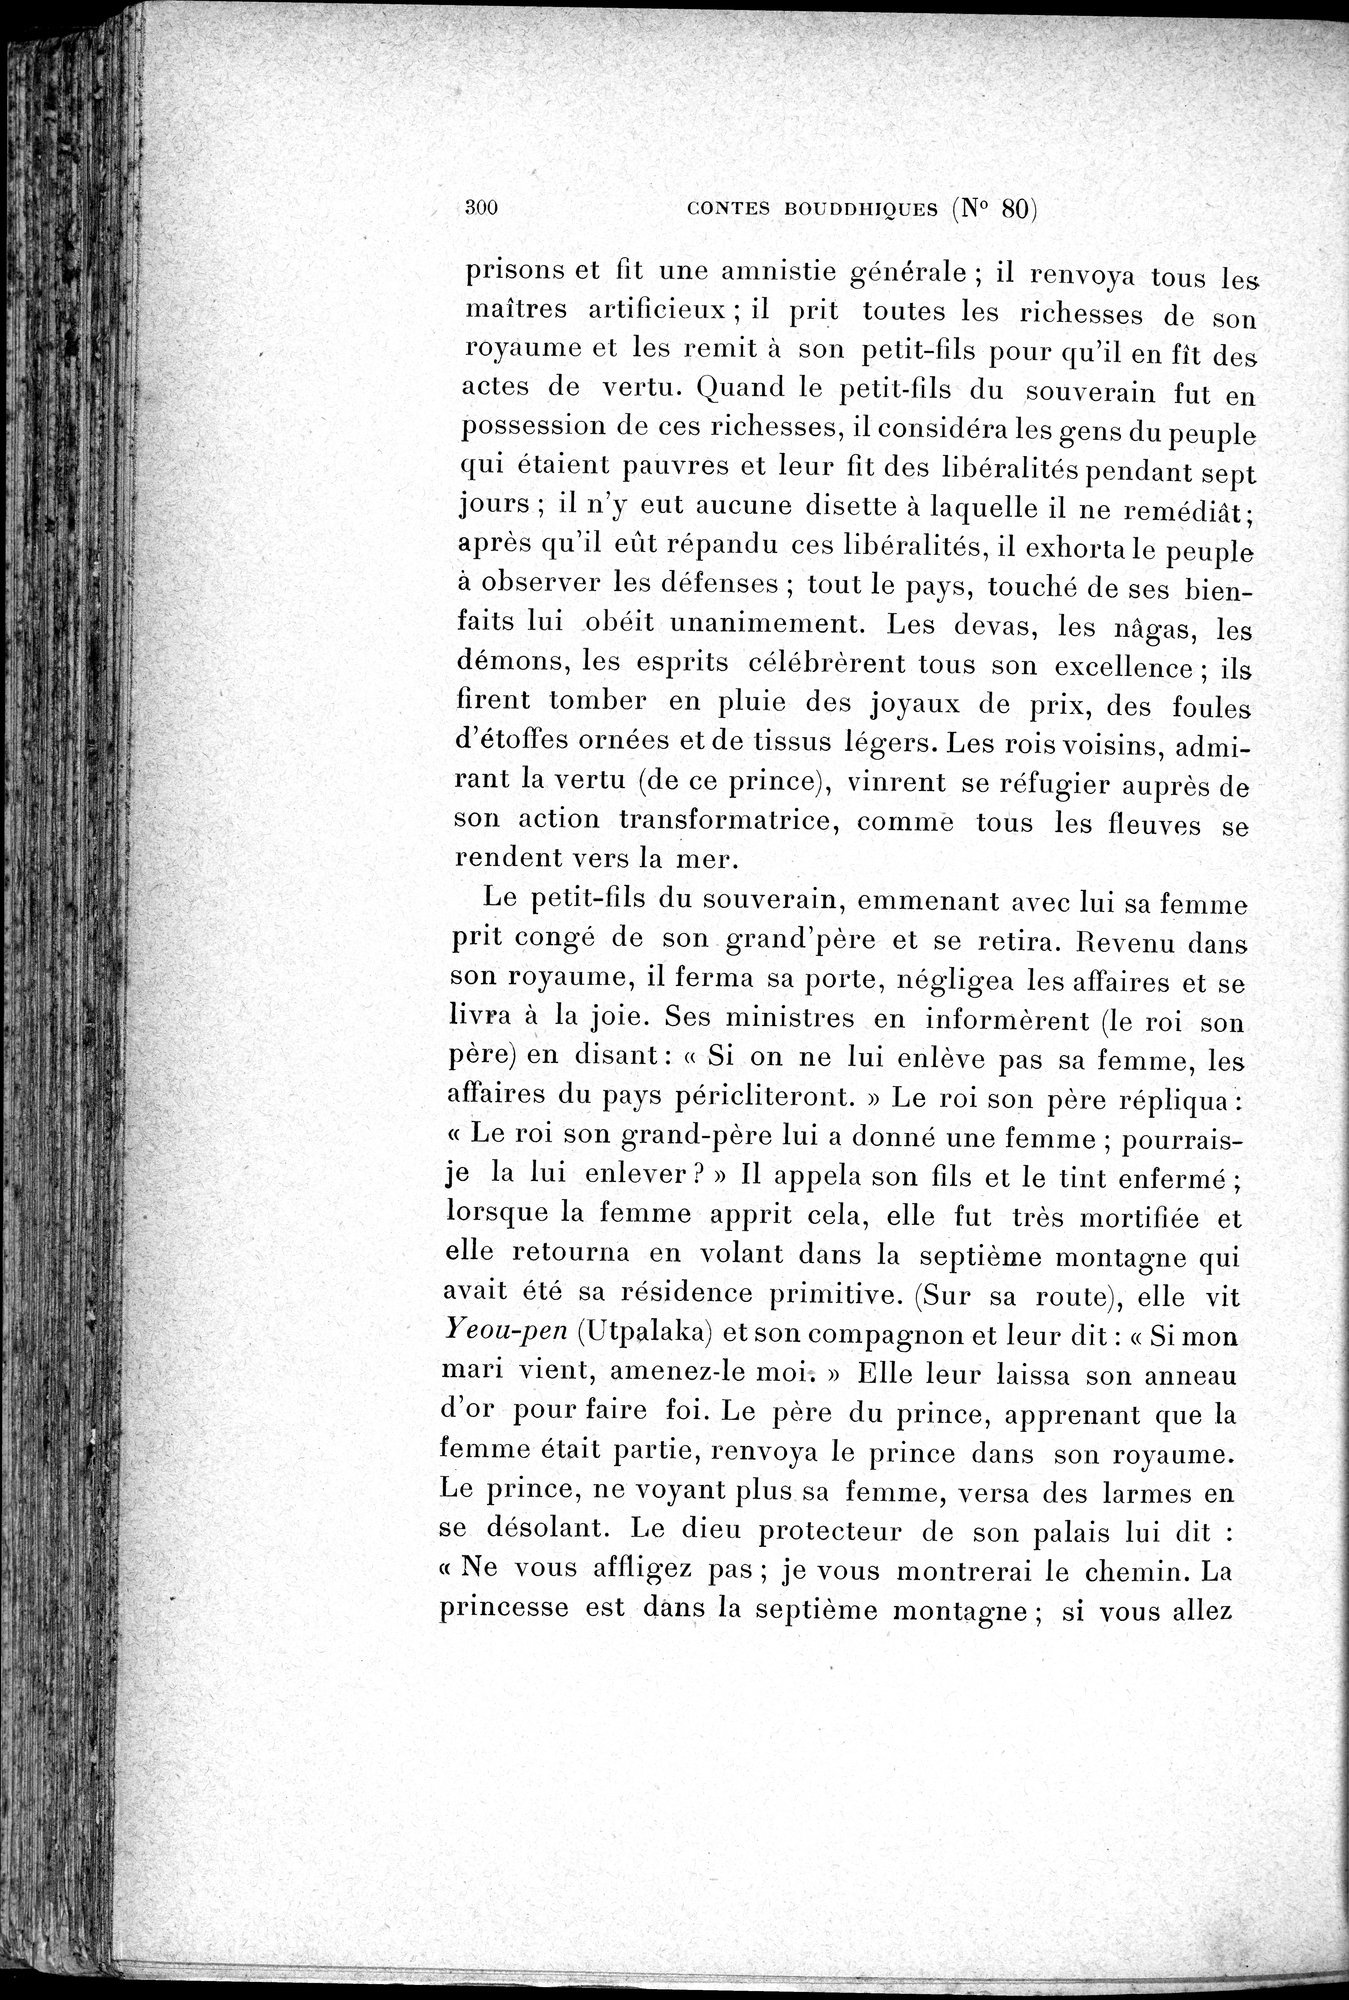 Cinq Cents Contes et Apologues : vol.1 / Page 334 (Grayscale High Resolution Image)